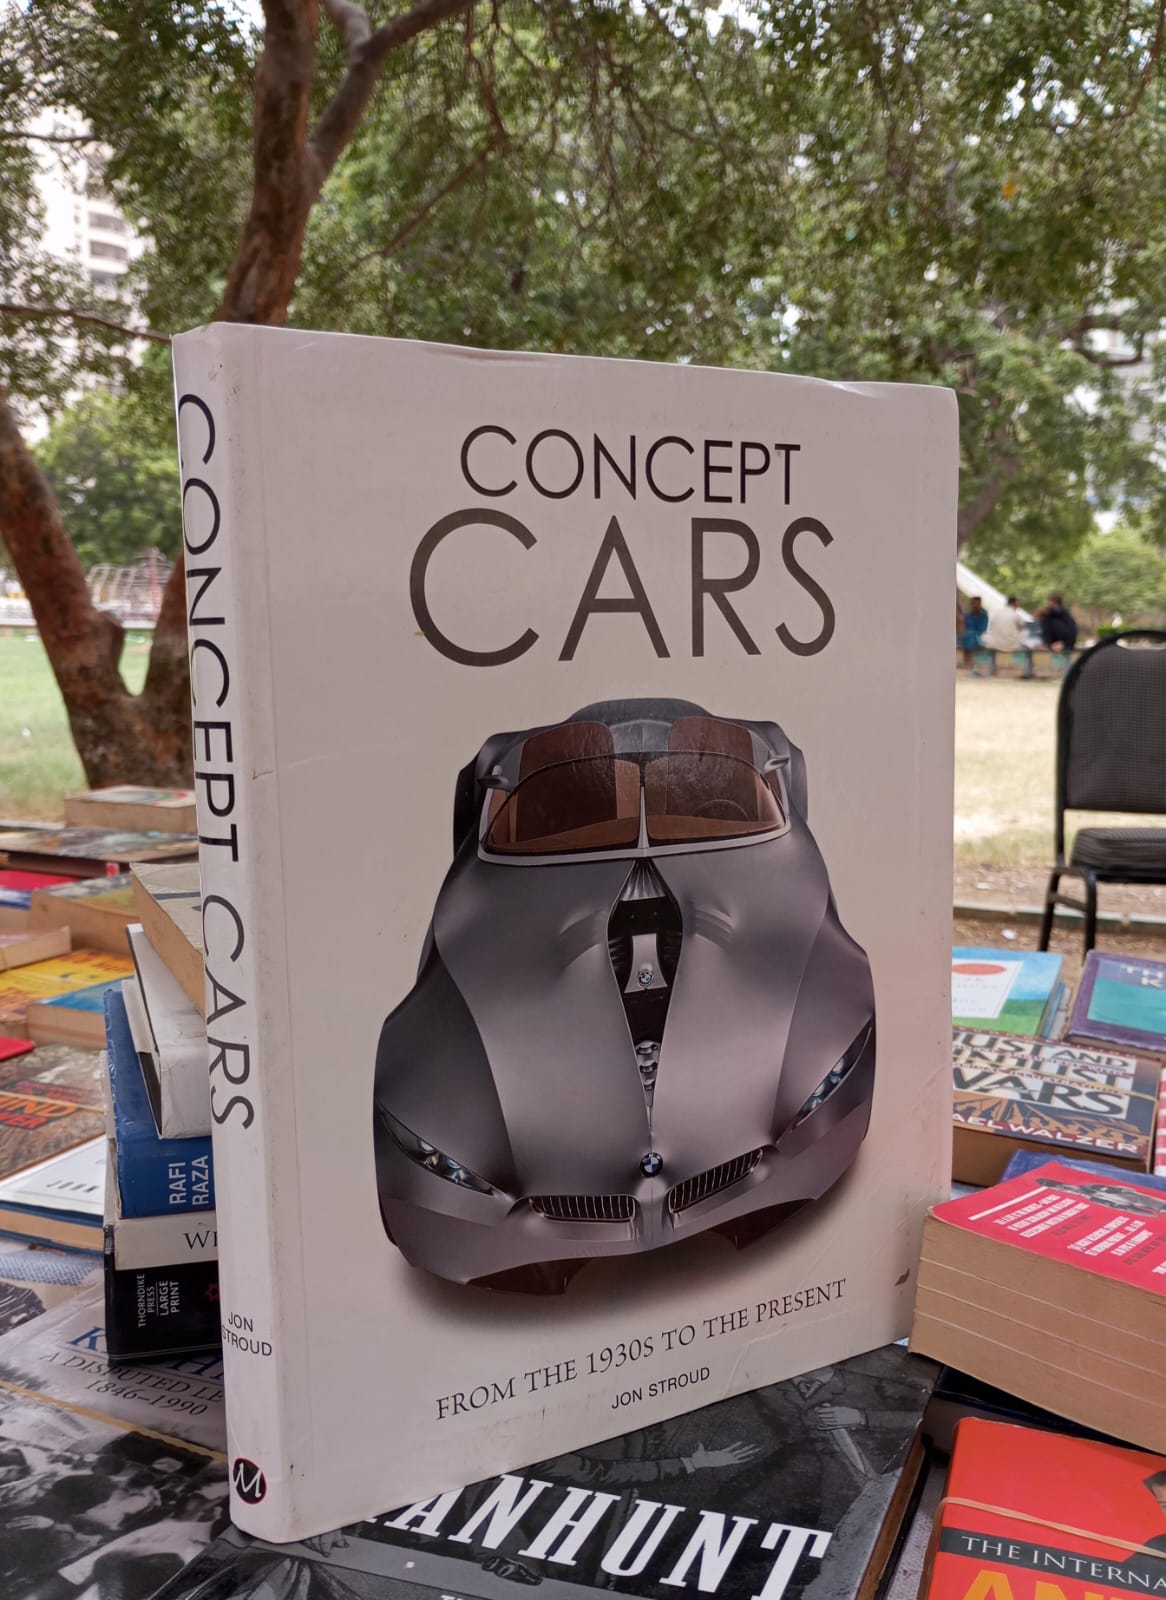 concept cars from the 1930s to the present by jon stroud.